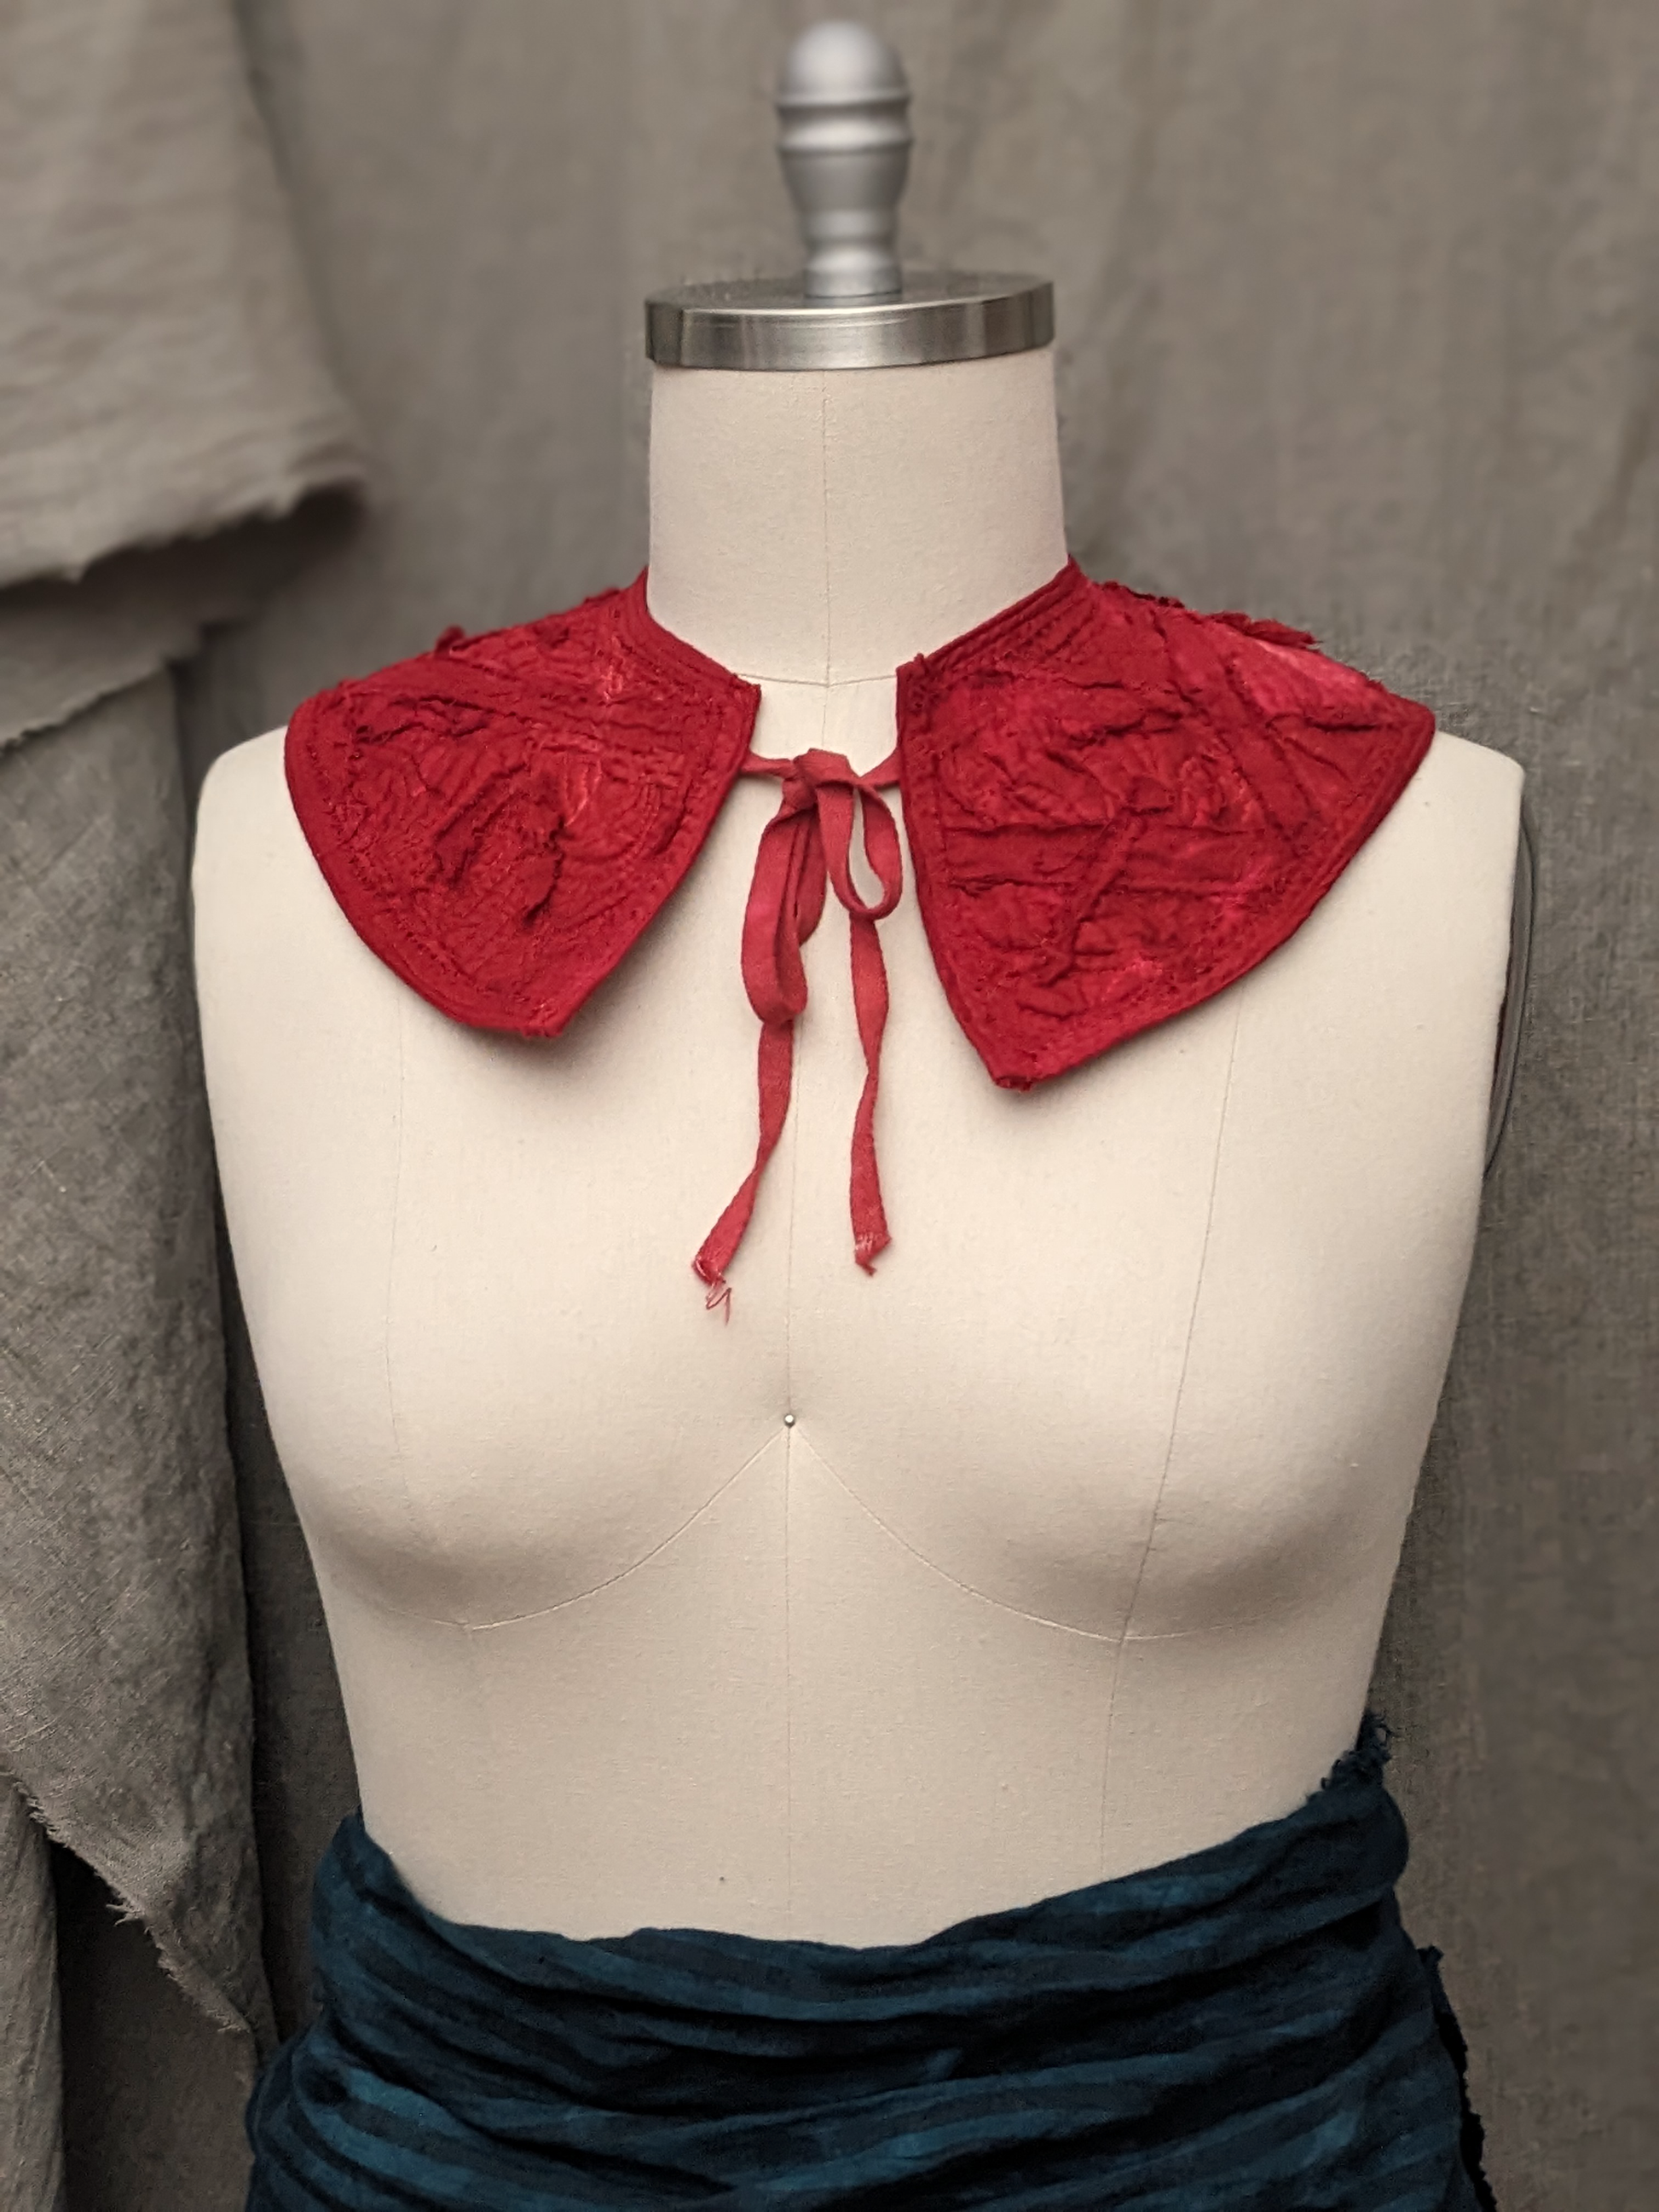 secret lentil artifacted collar (detachable / attachable) in bold red